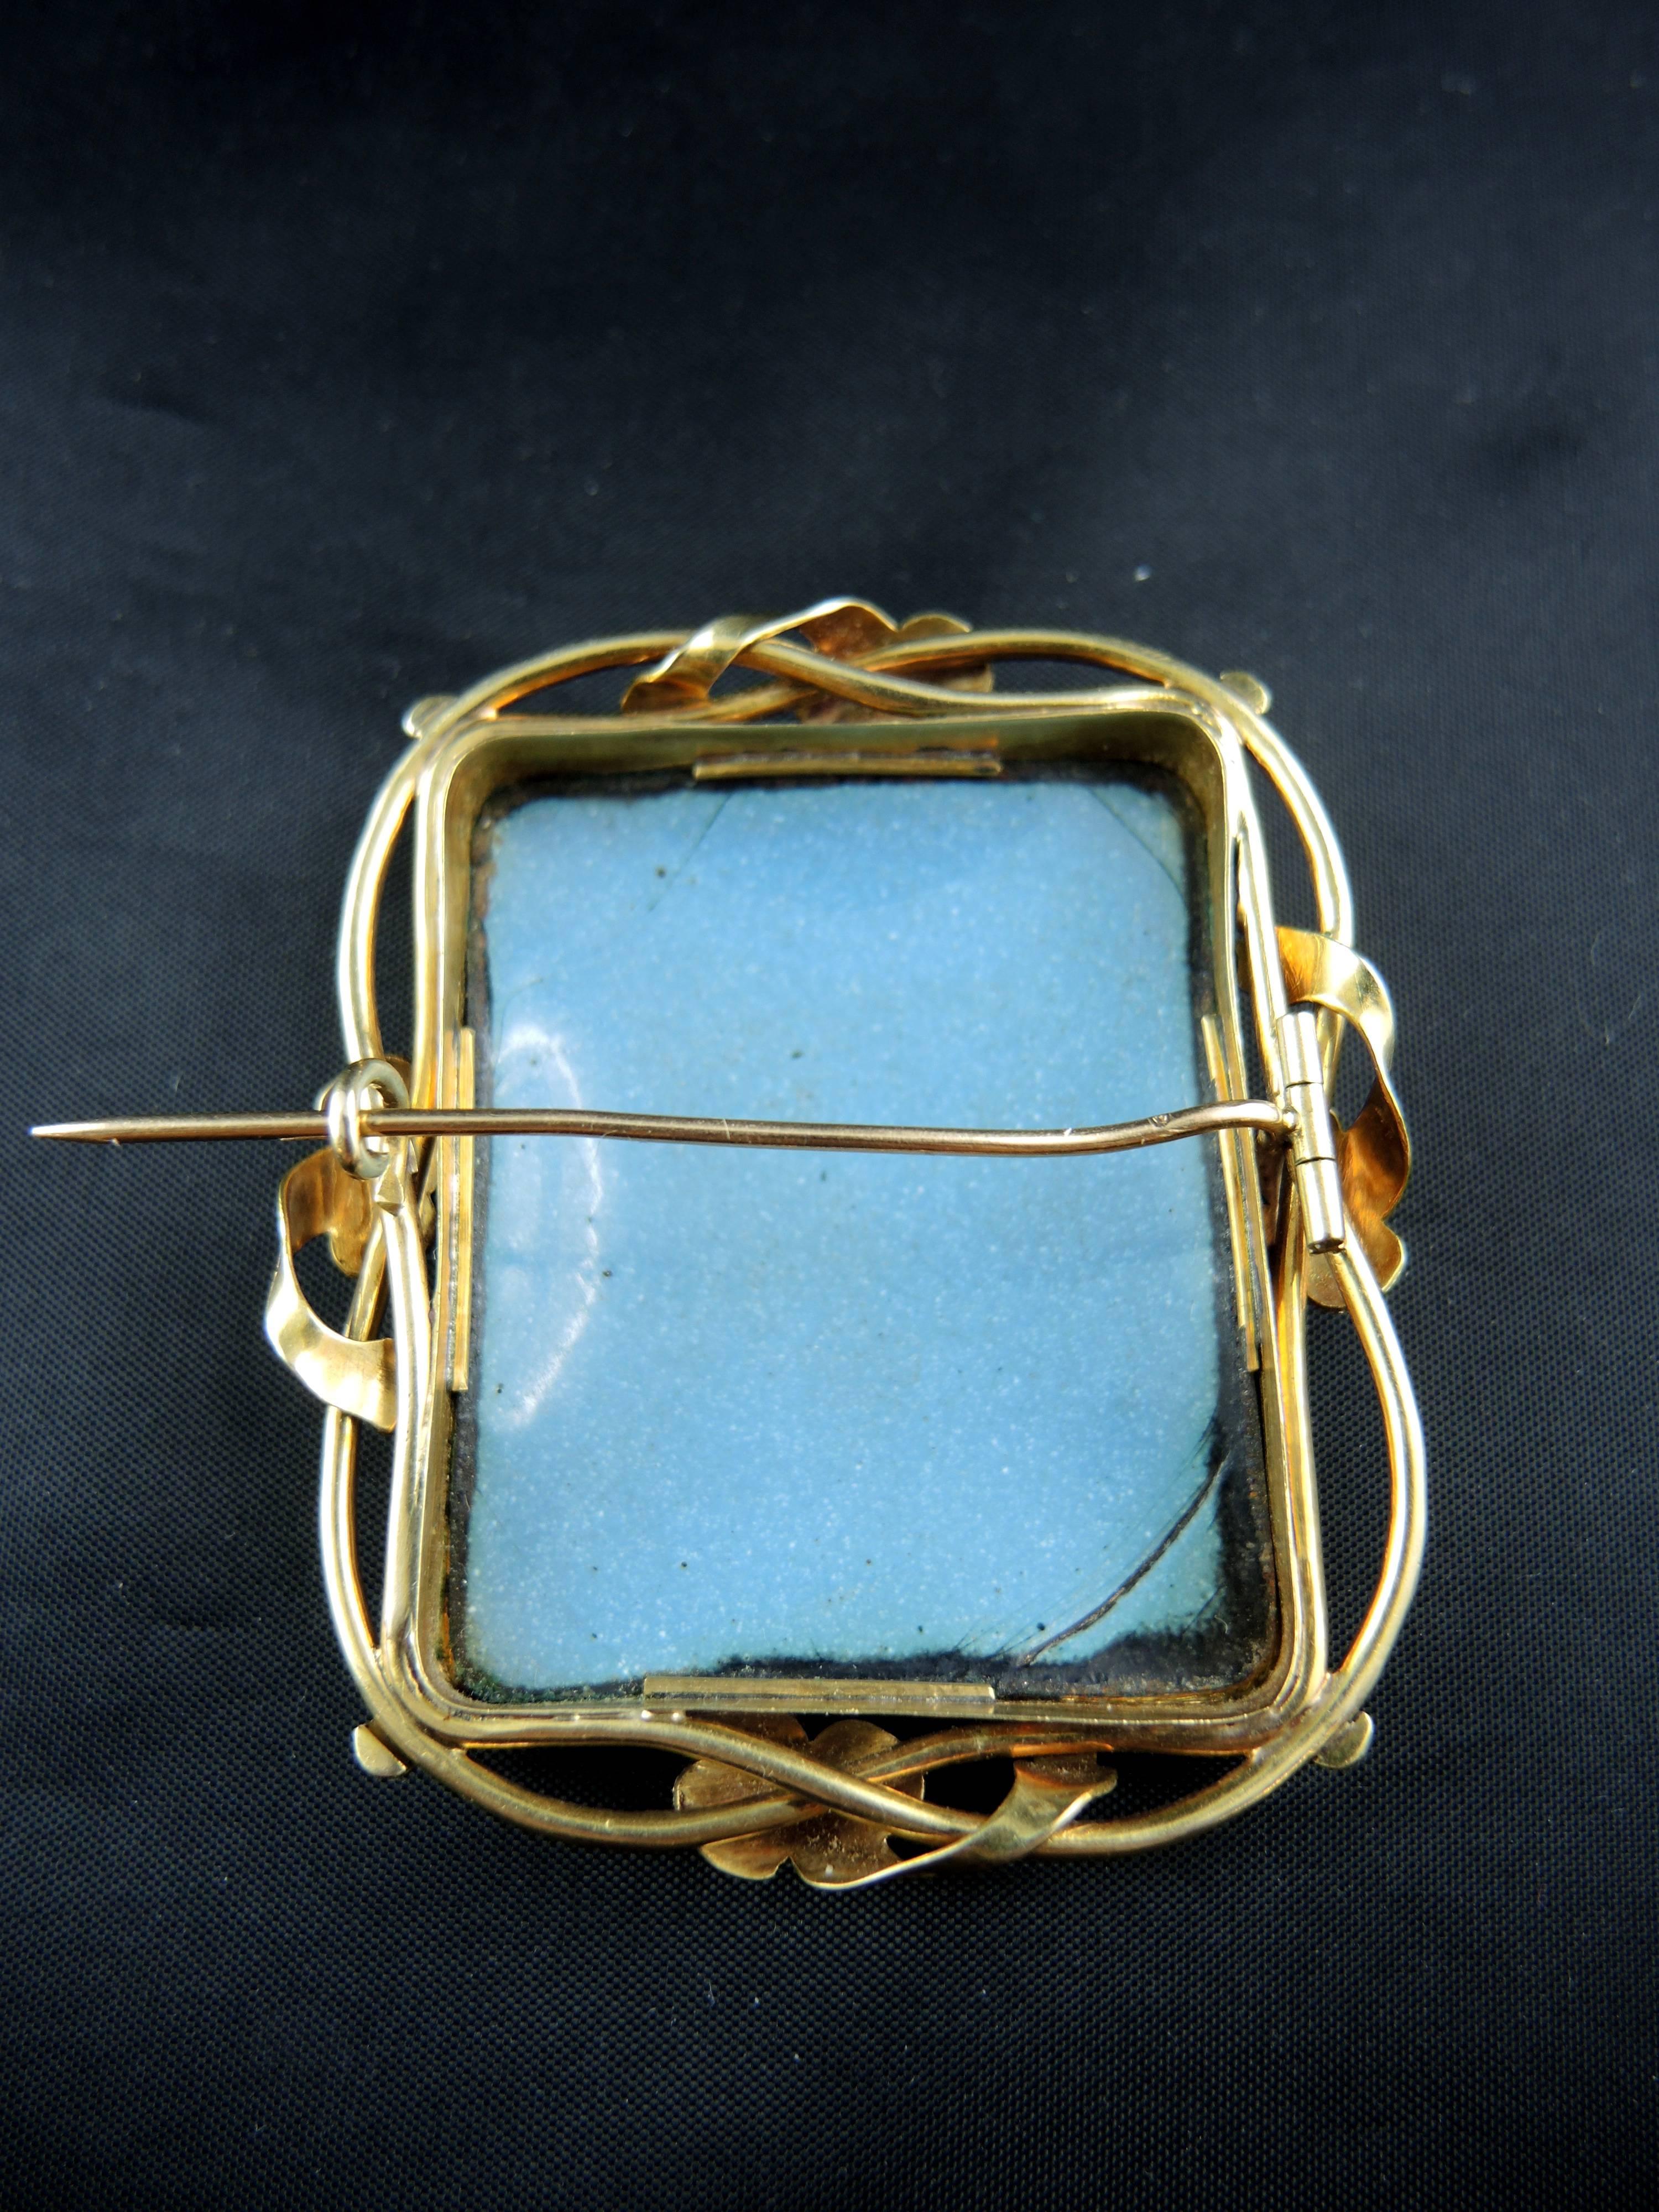 Miniature Antique Gold Brooch with Enamel For Sale 2